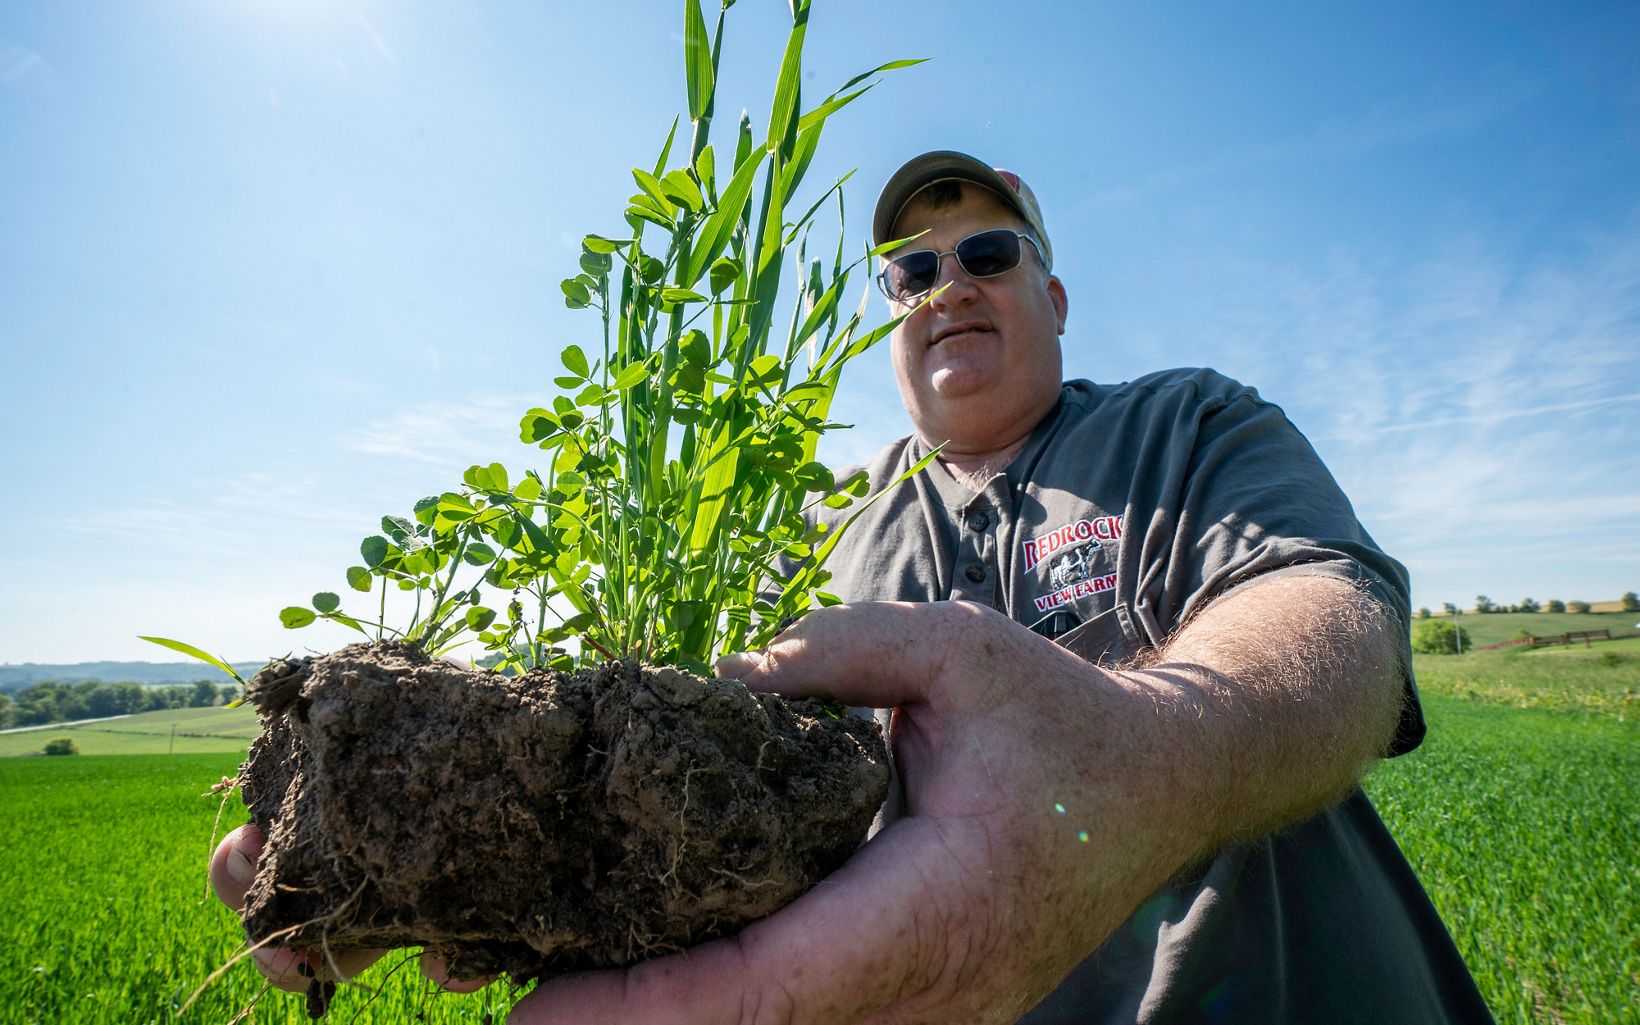 Steve Carpenter stands in a green field and holds up to the camera a large clump of soil with plants growing out of it.